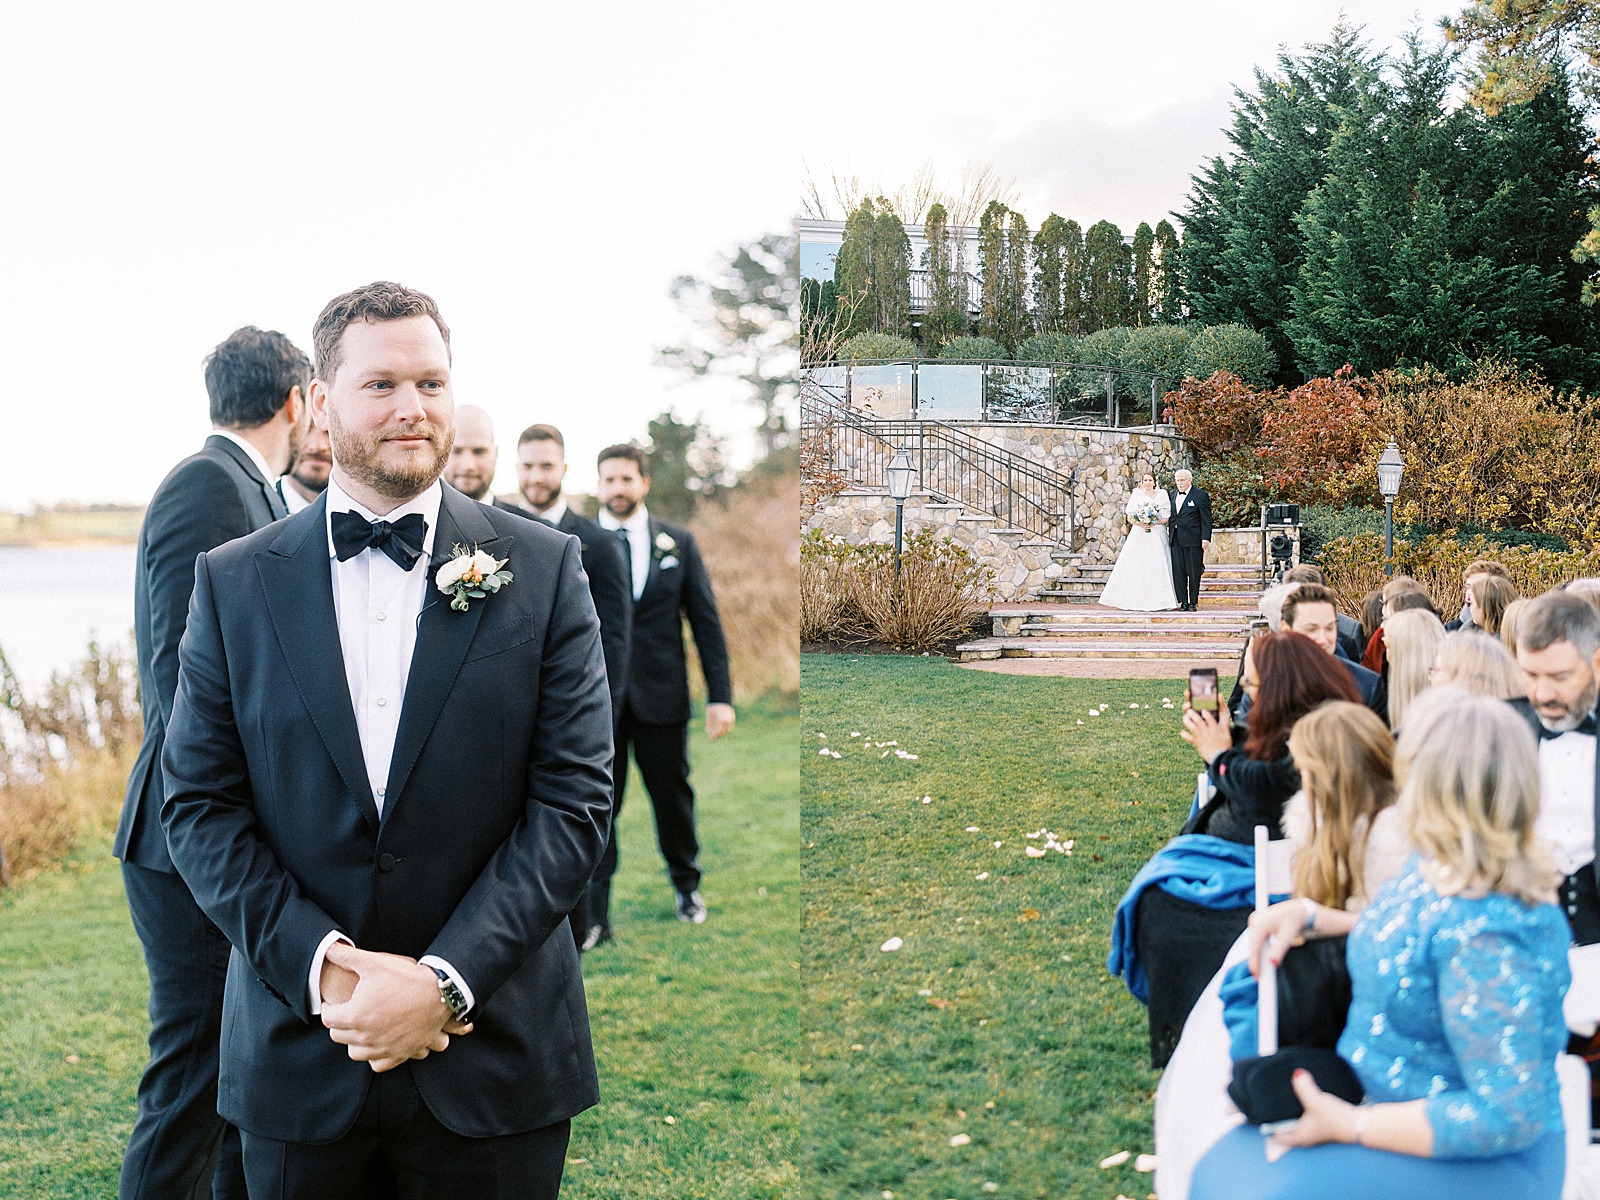 Groom watching his bride walk down the aisle at outdoor ceremony 